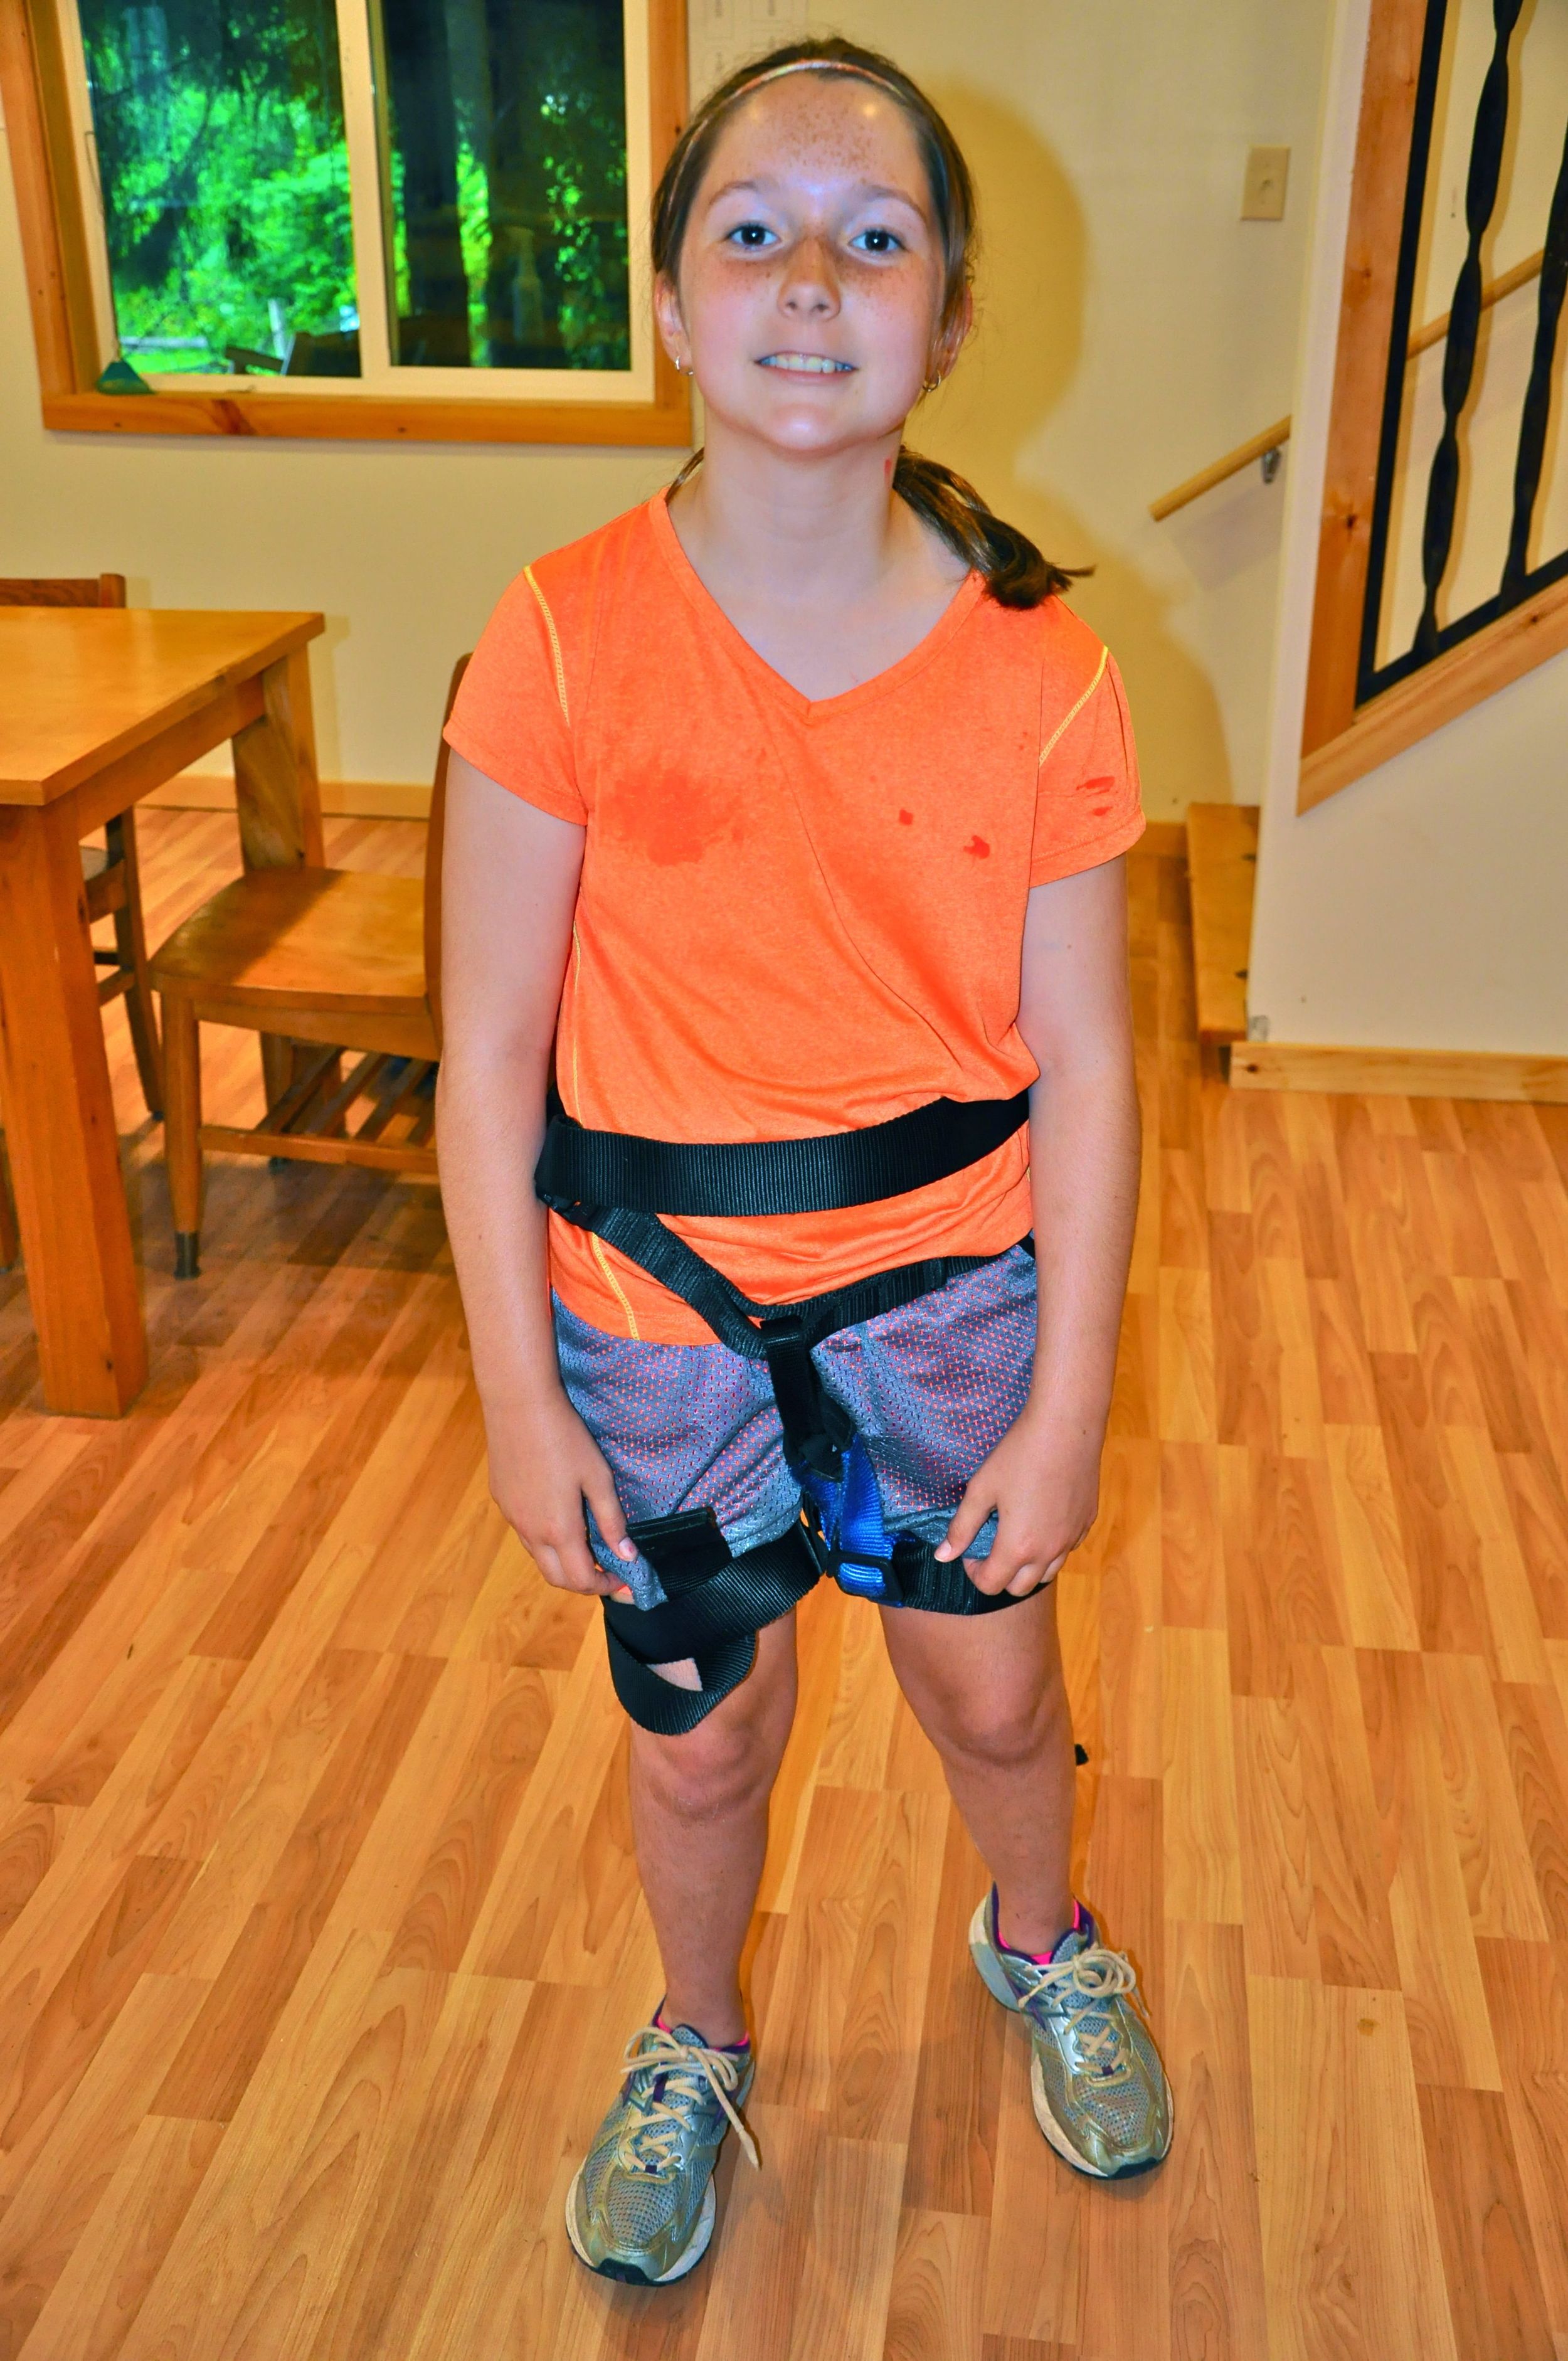 olivia-puts-on-climbing-gear-to-practice-for-the-climbing-wall.jpg